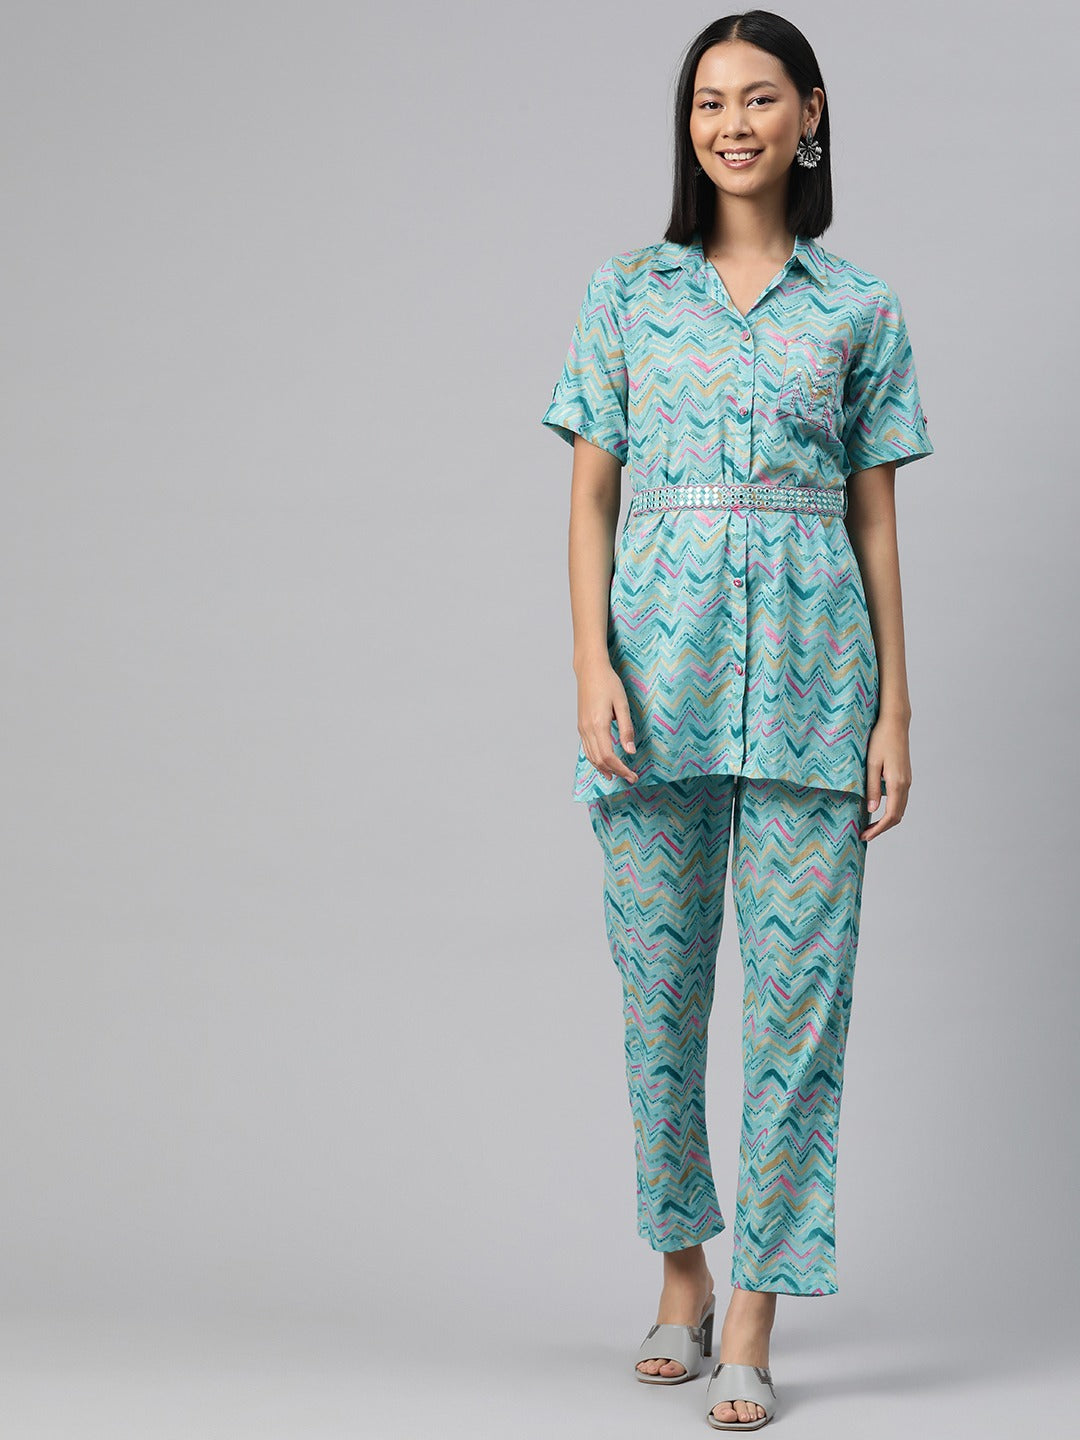 Shirt Style Cotton Fabric Turquoise Blue Color Co-Ord Set